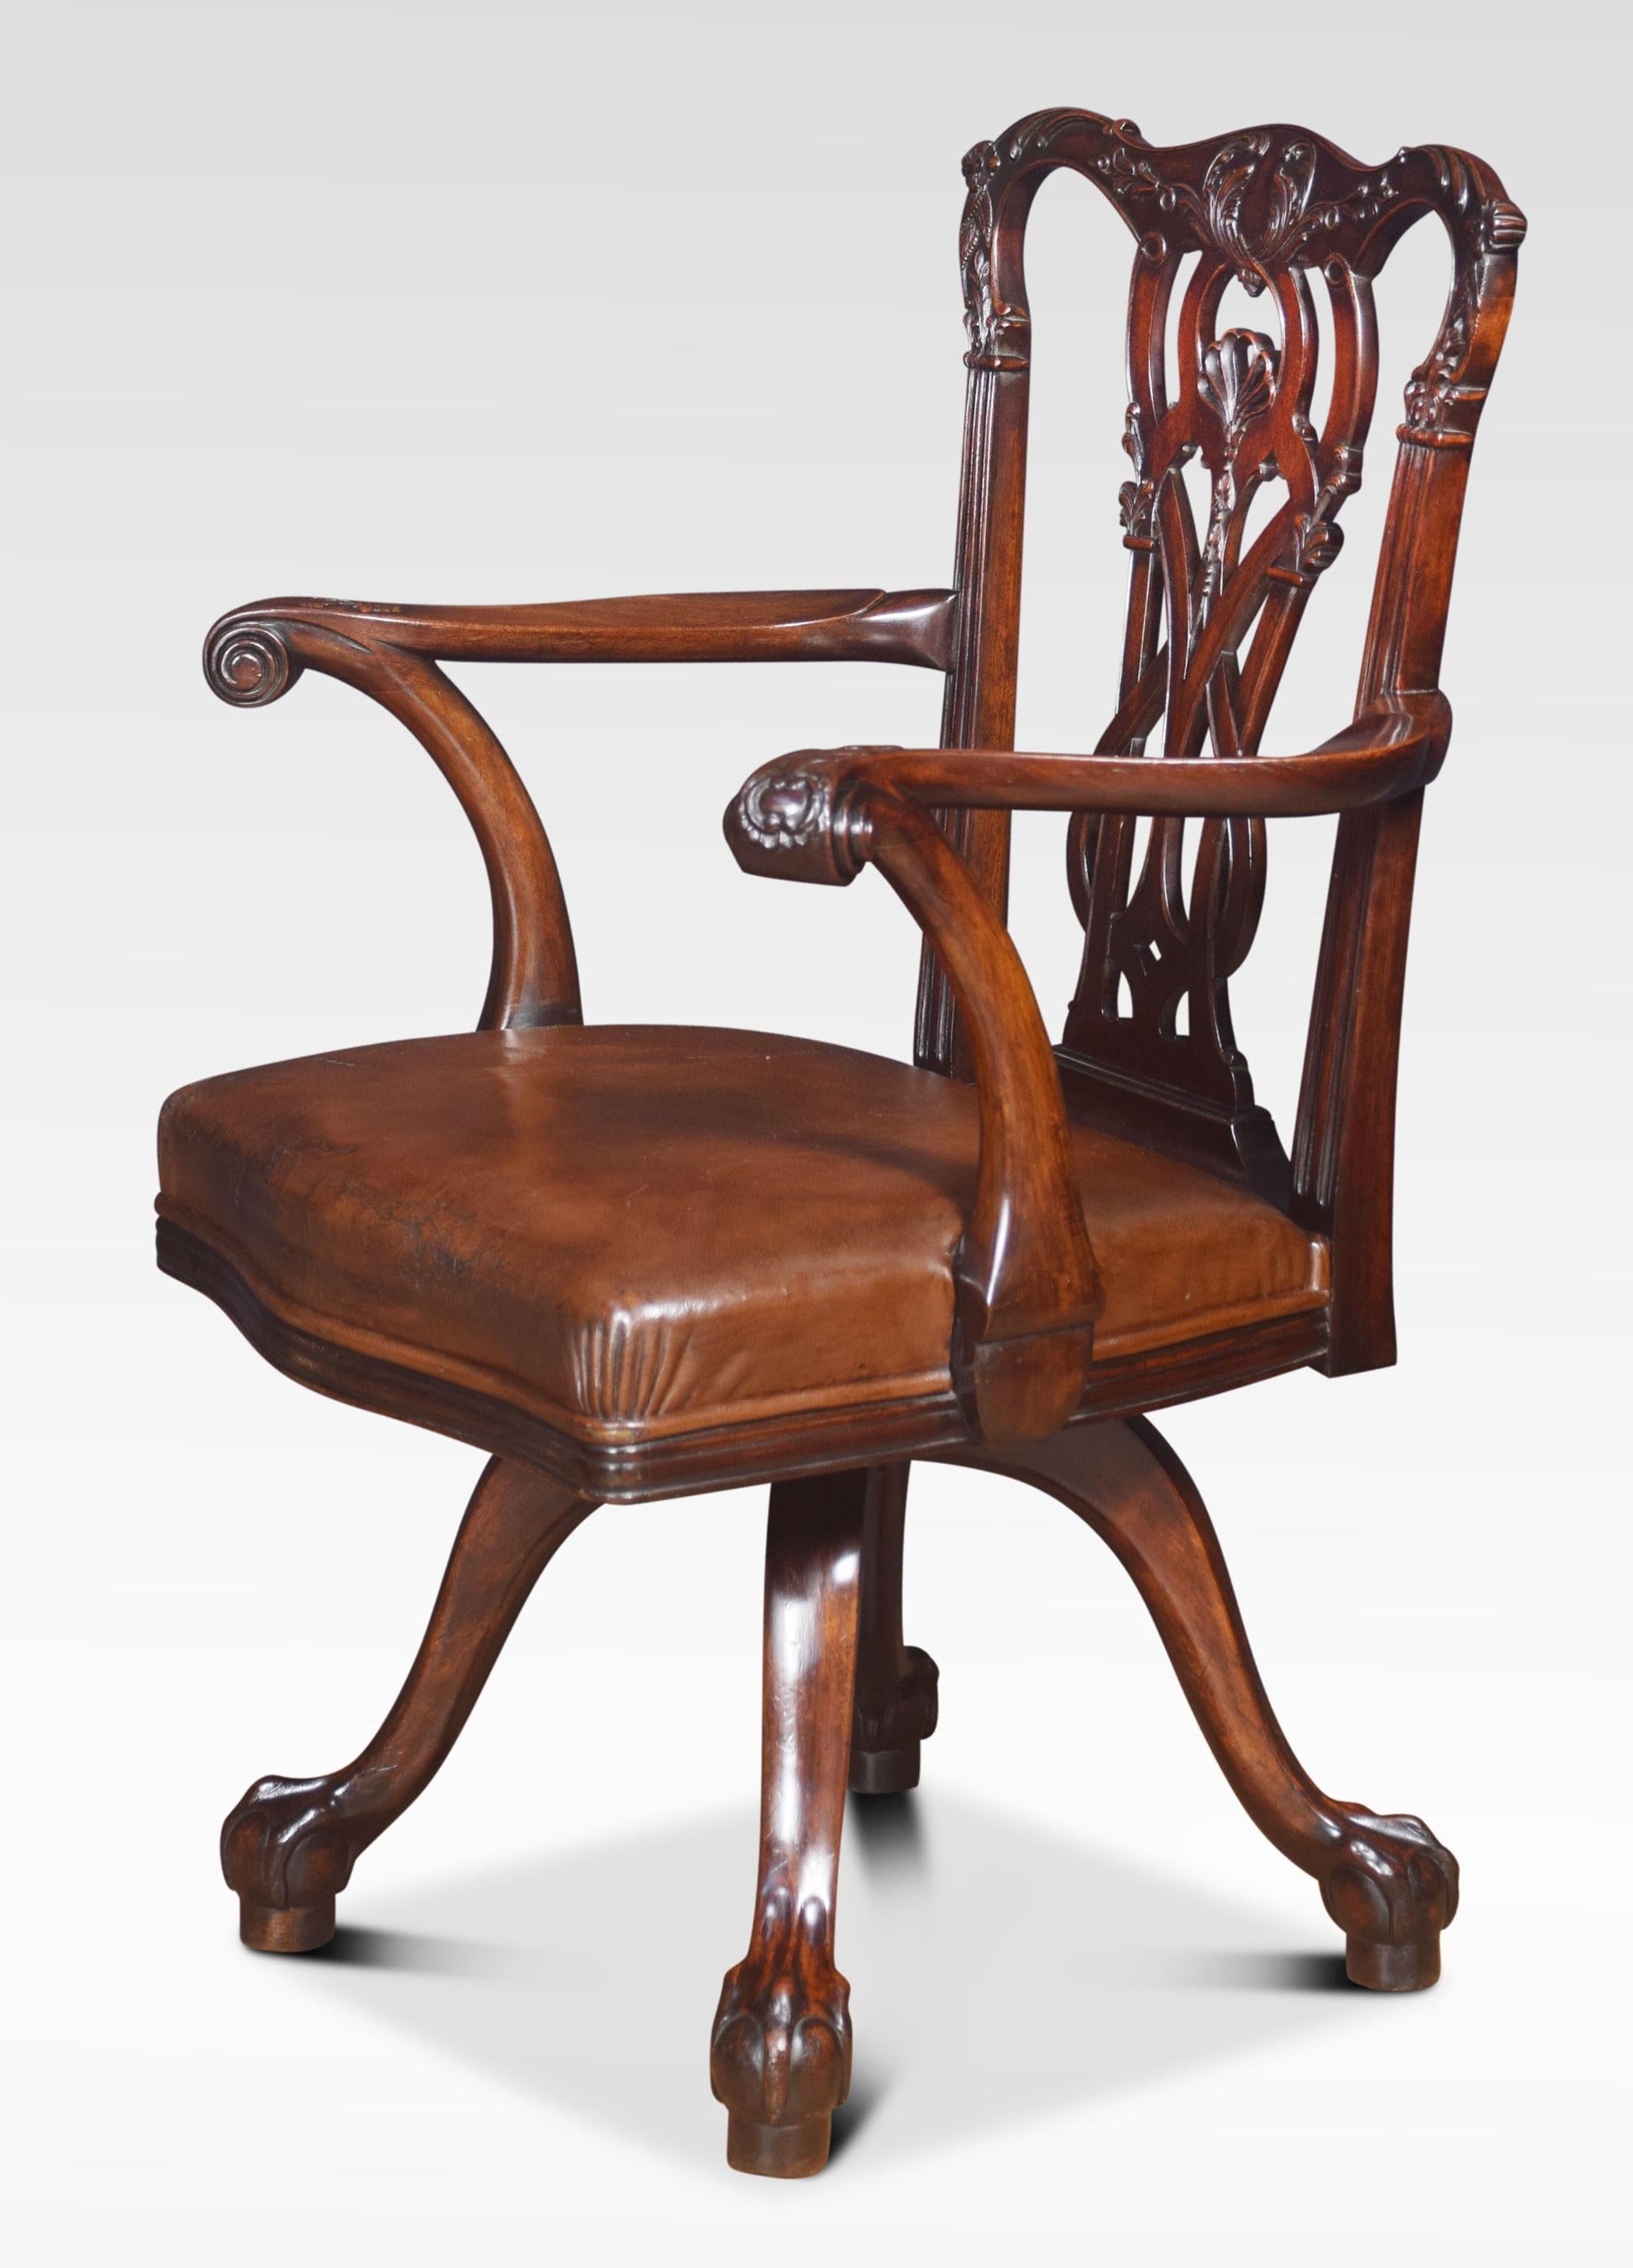 Late 19th century Chippendale style mahogany revolving desk chair. The carved and interlaced splat back above out swept arms and carved paper scrolls, above the serpentine leather seat mounted on an iron revolving mechanism. All raised up on four